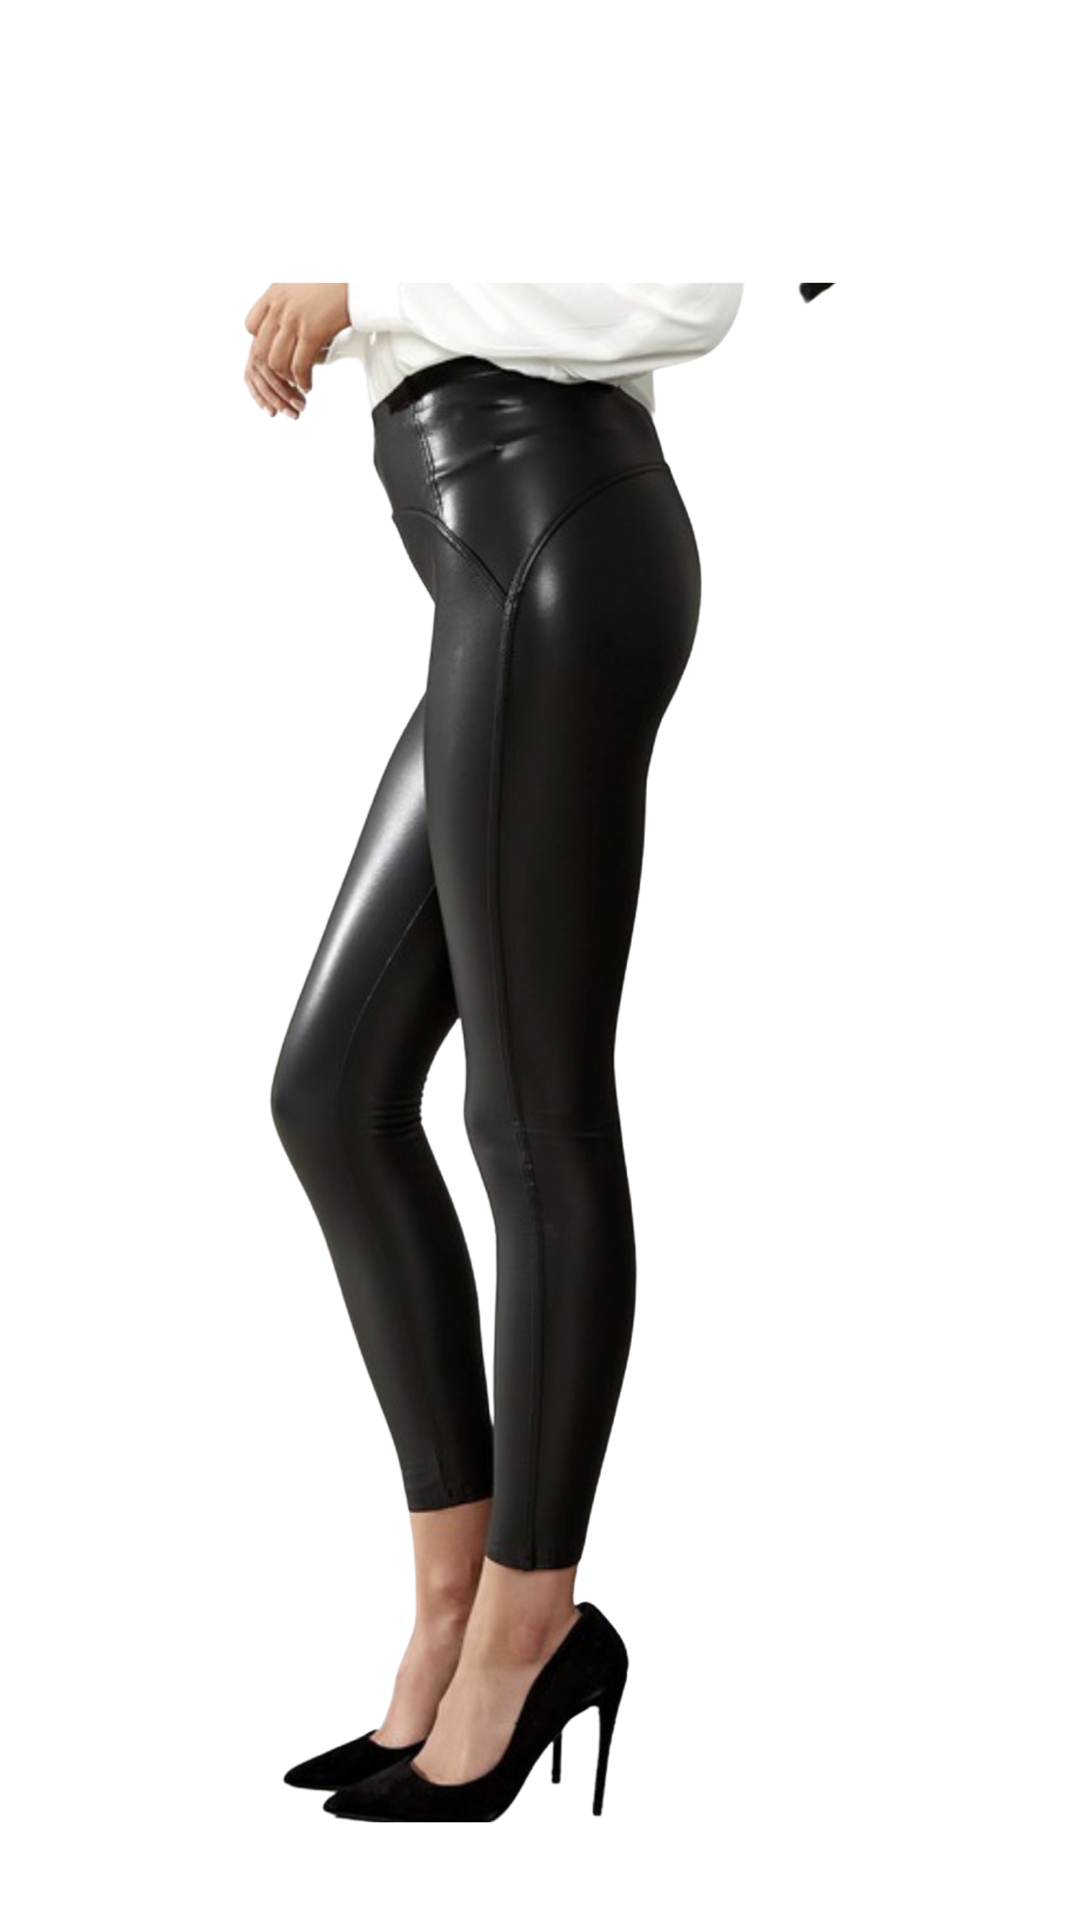 Tagoo Faux Leather Leggings for Women Black High Waisted Pleather